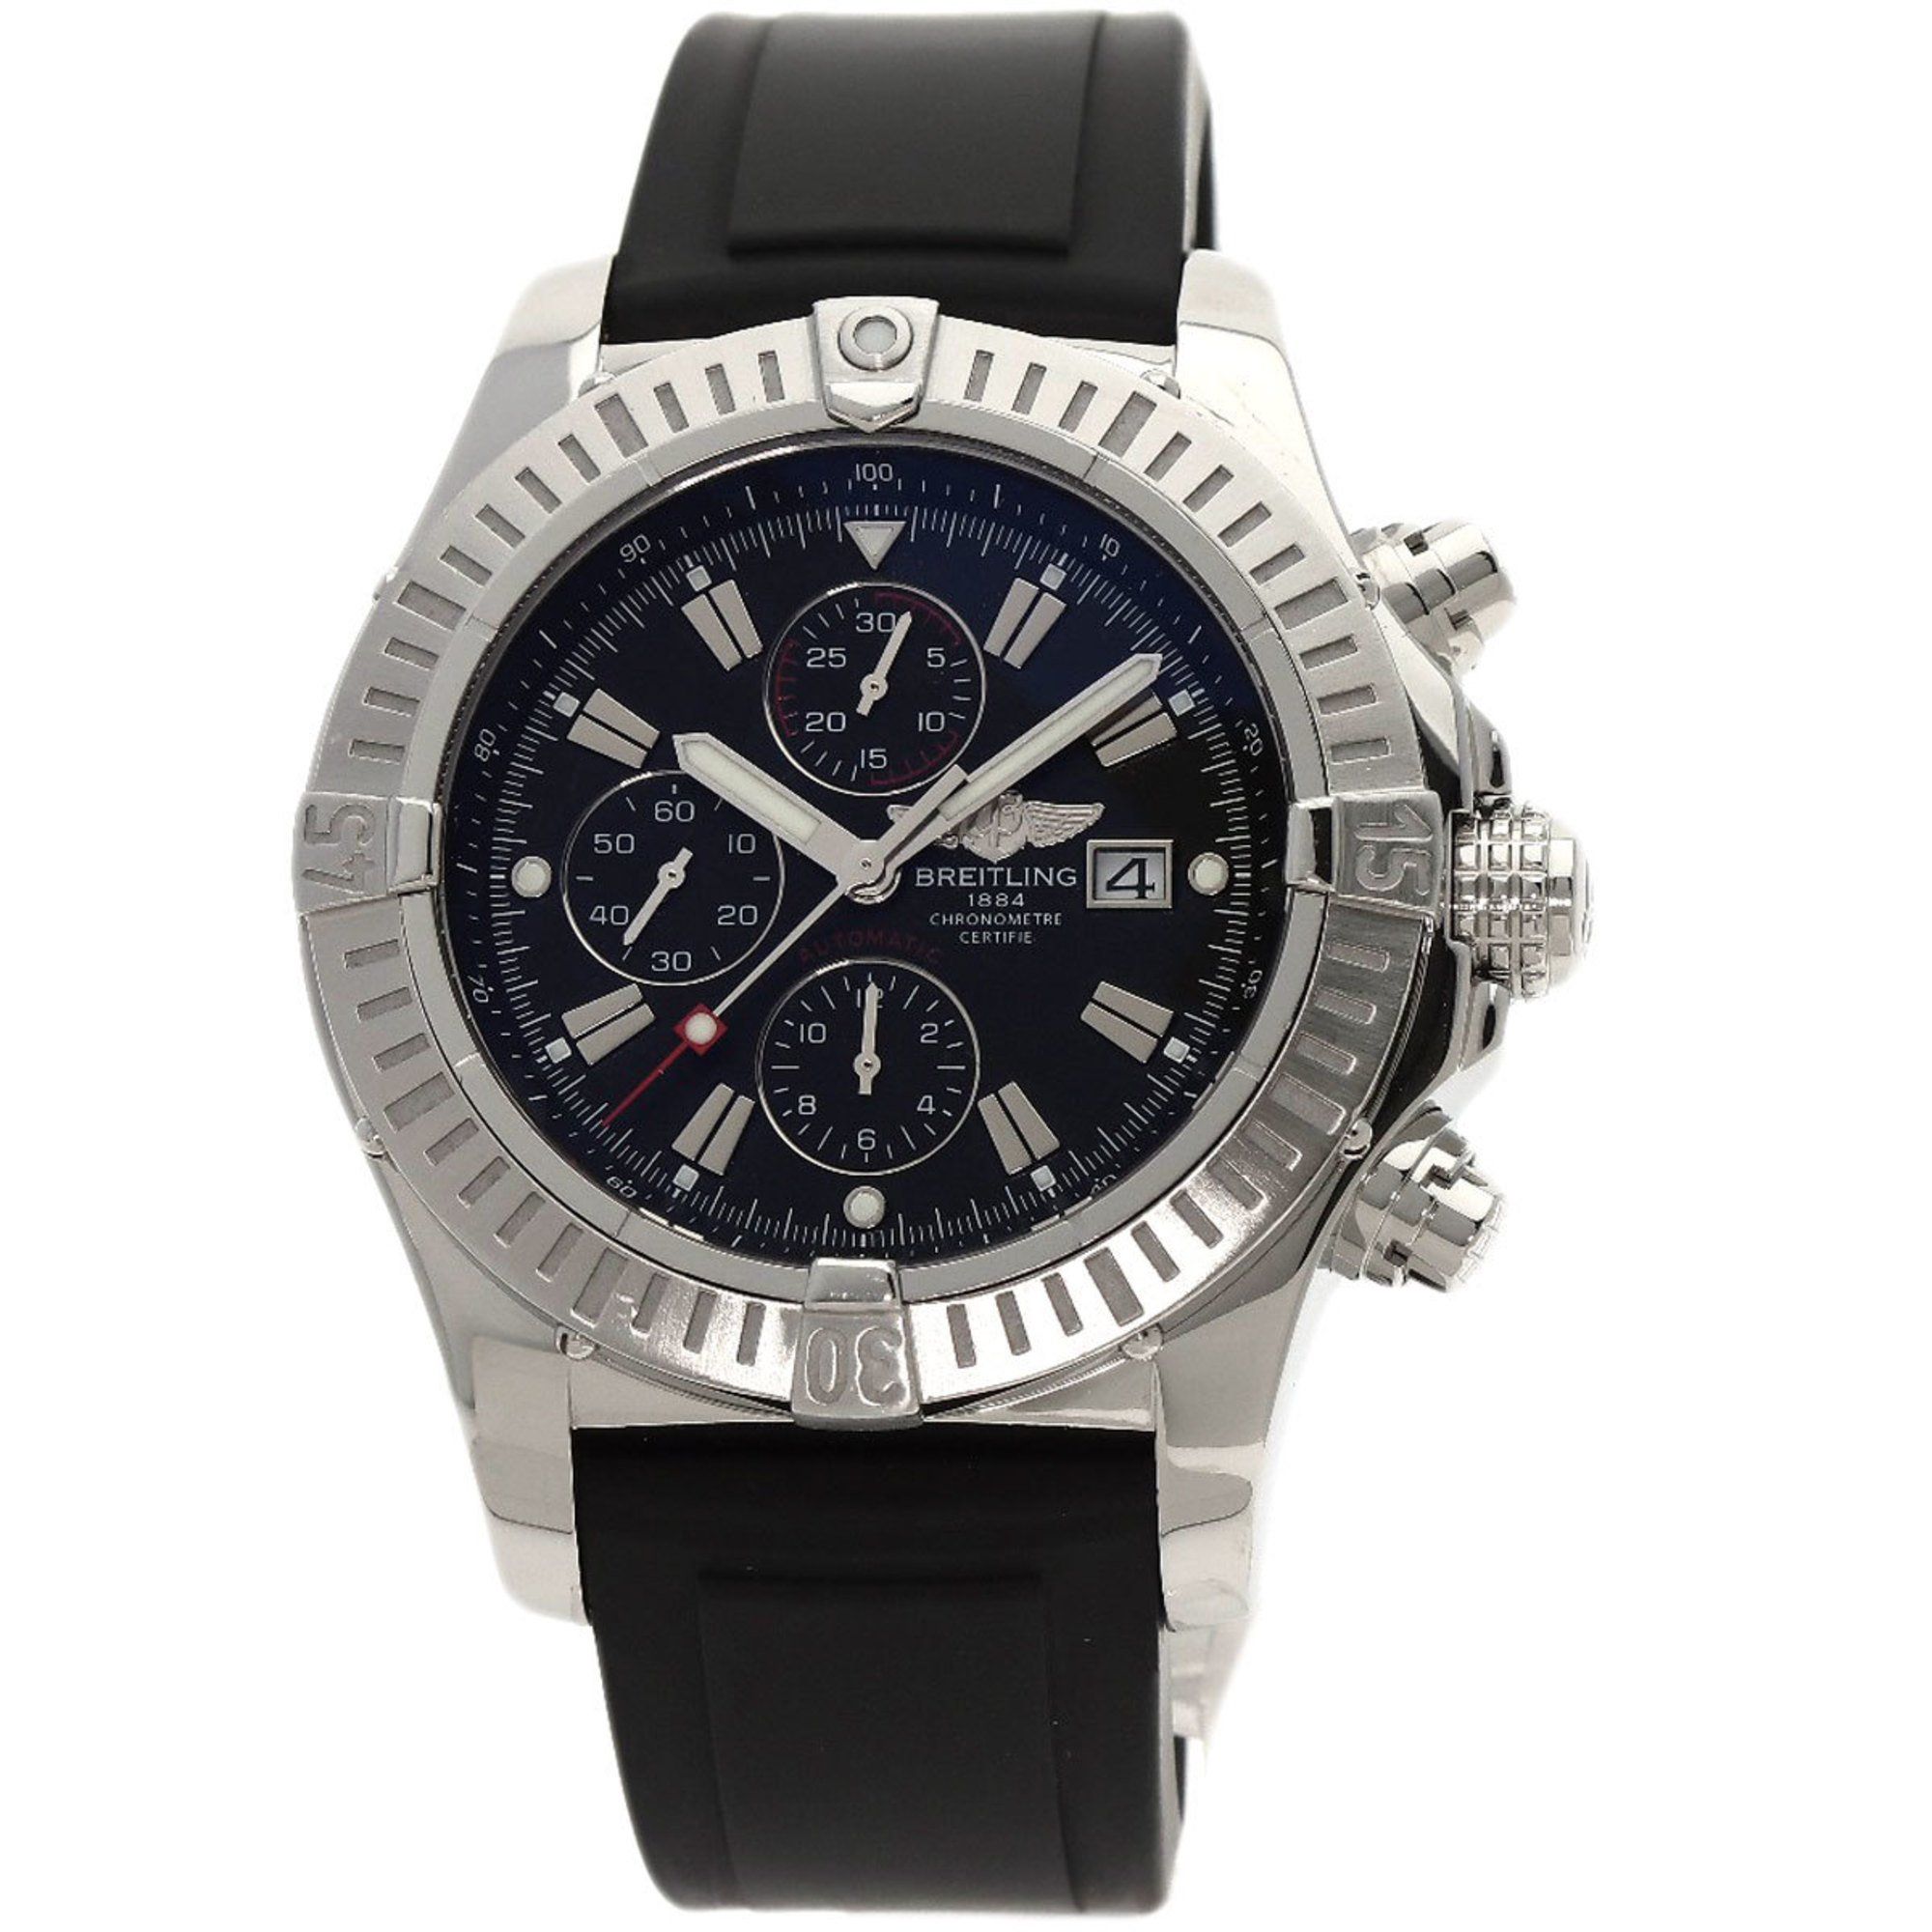 image of Breitling A1337B07Prs Super Avenger Chrono Watch Stainless Steel/rubber Men's Breitling in Black